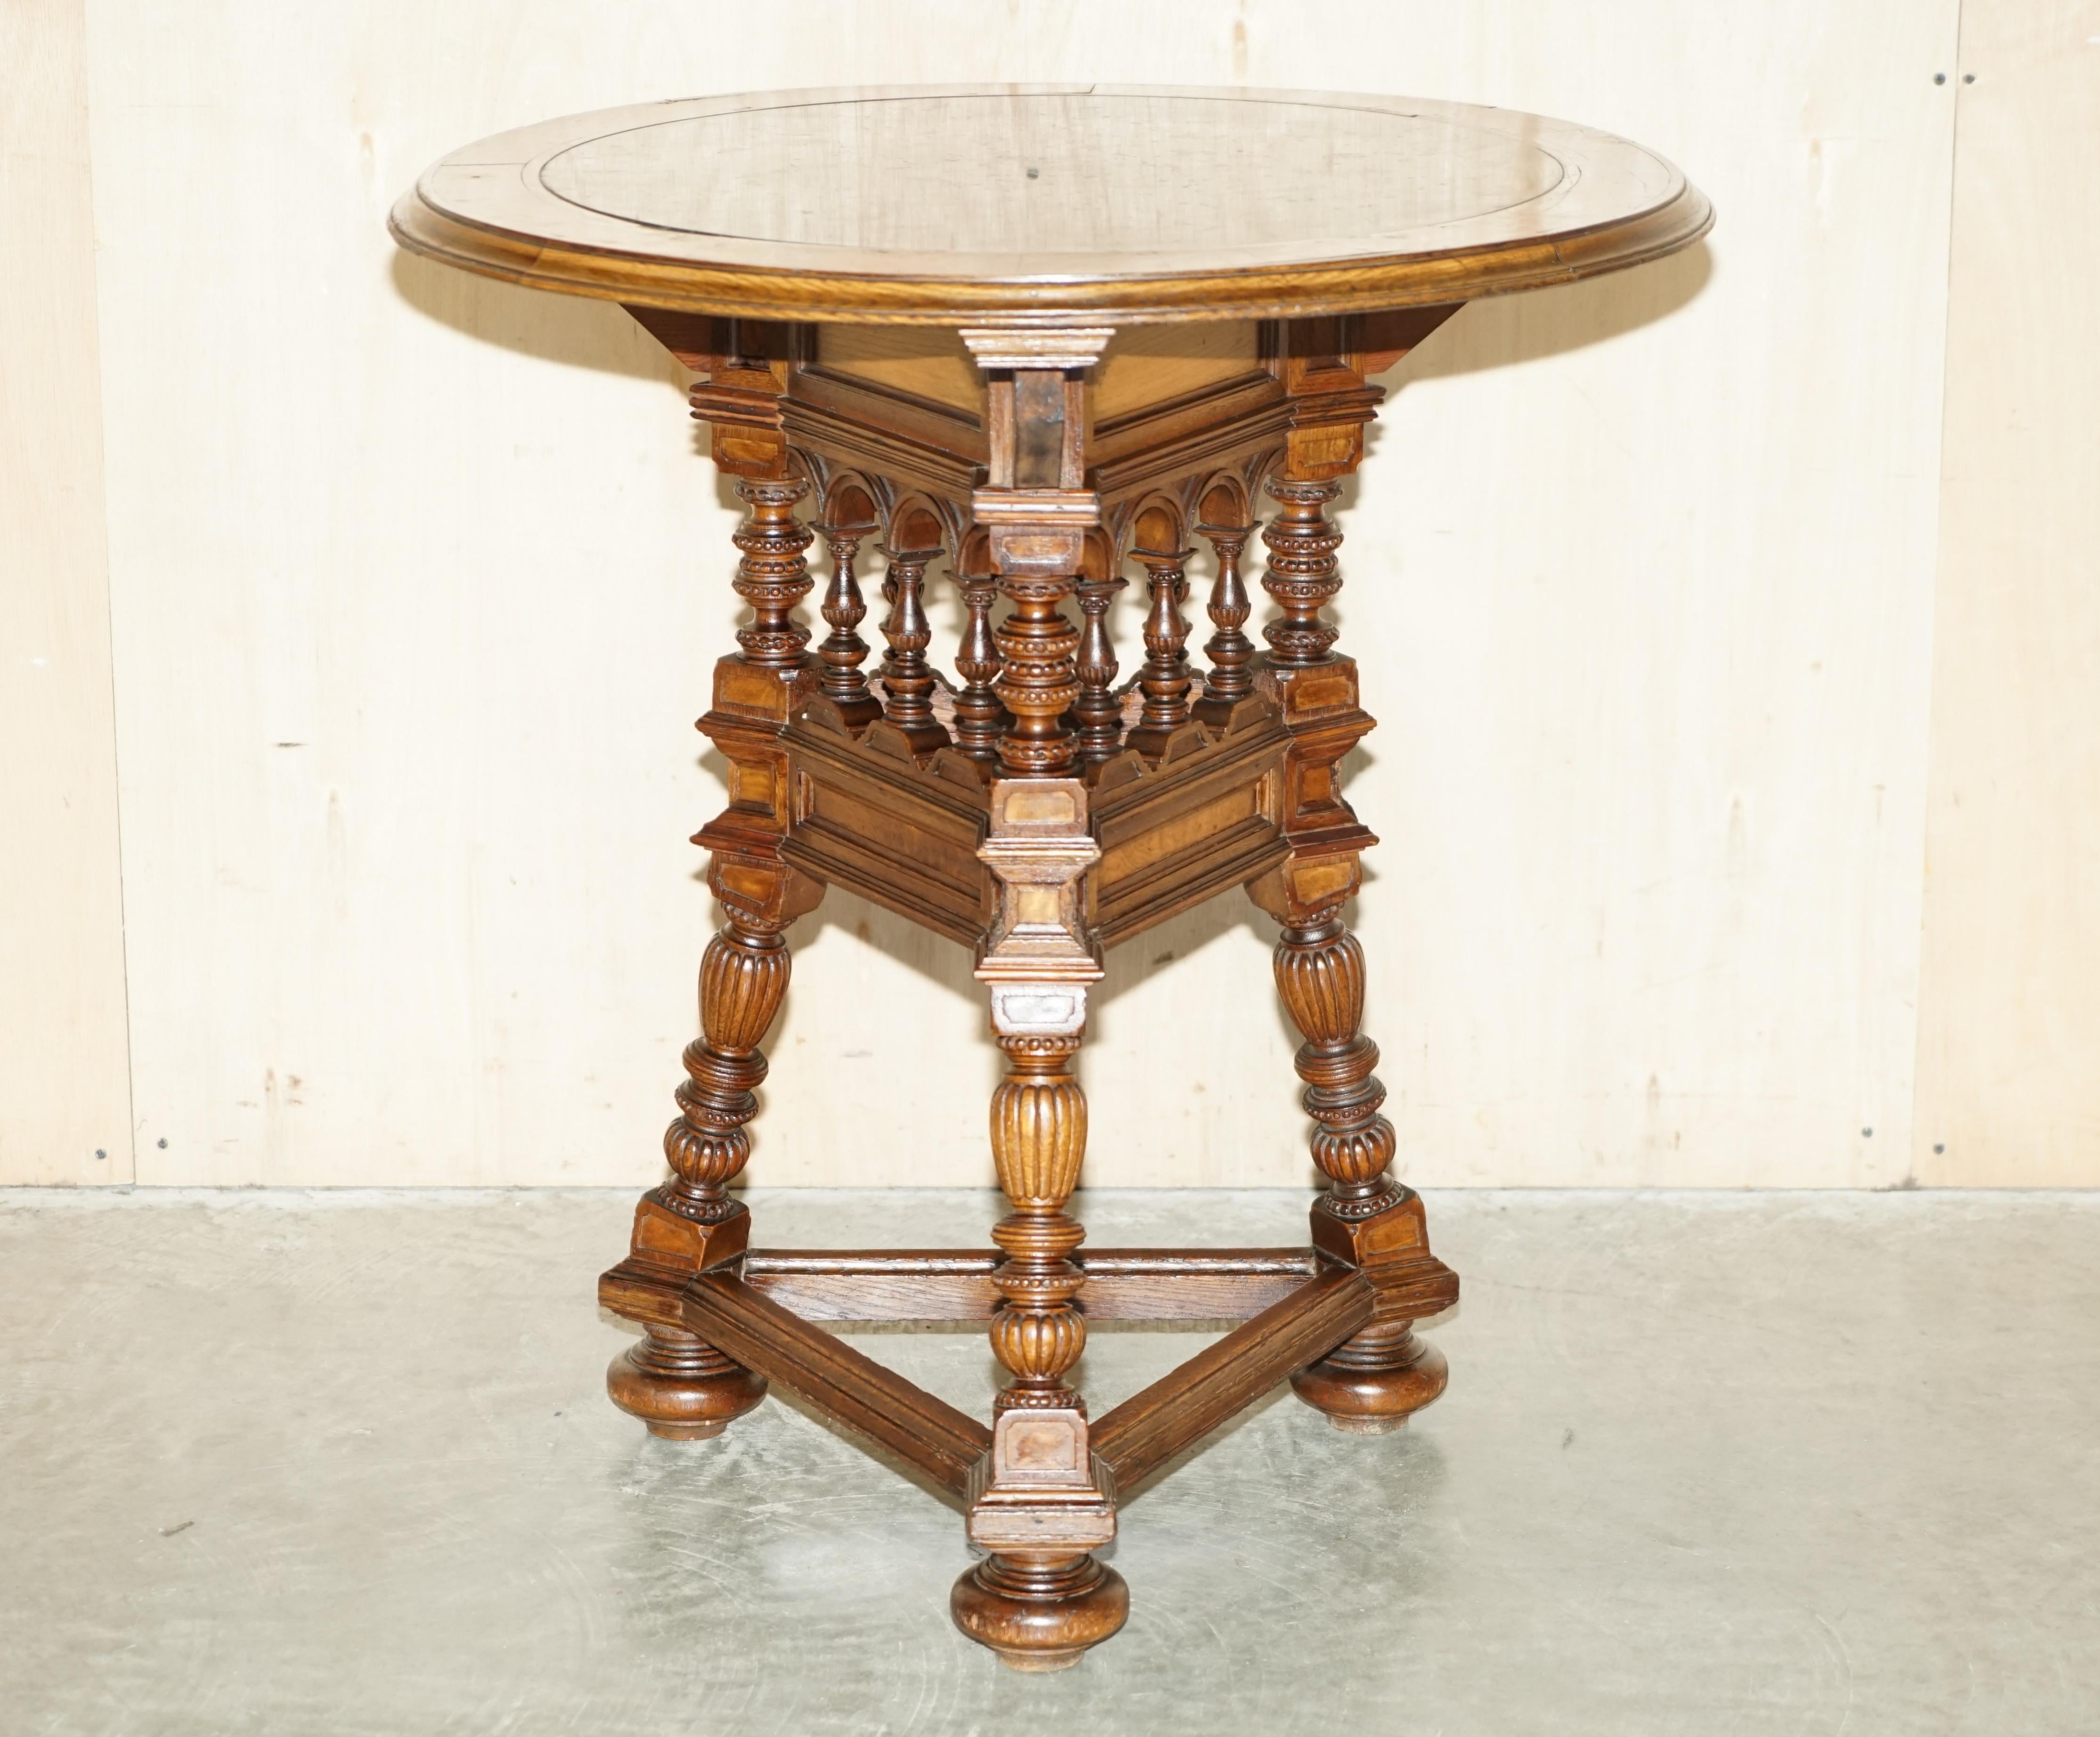 We are delighted to offer for sale this very decorative, hand made in England, circa 1860 Victorian Aesthetic movement, Elm & Oak with thick marble top, large side table or small occasional table

A very good looking well-made and decorative